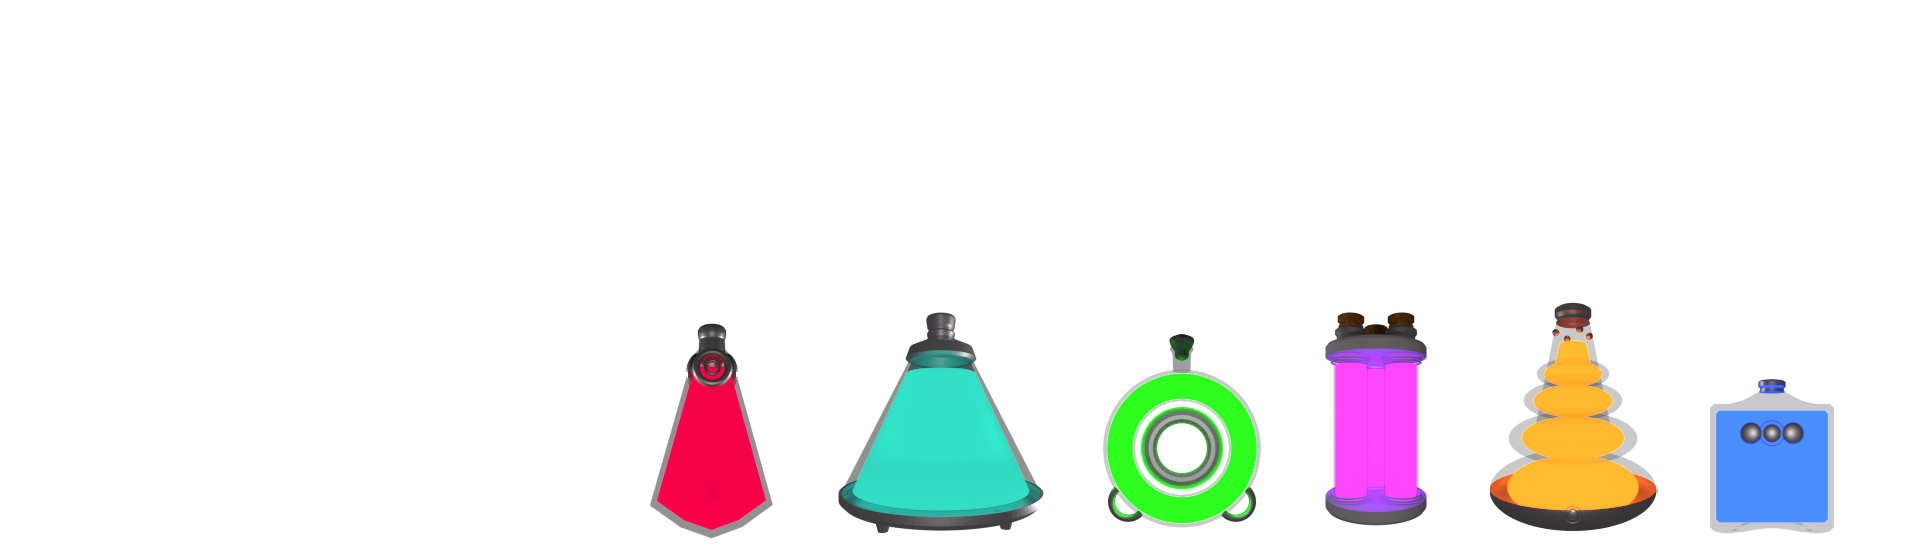 Potion Collection - Full Pack 01